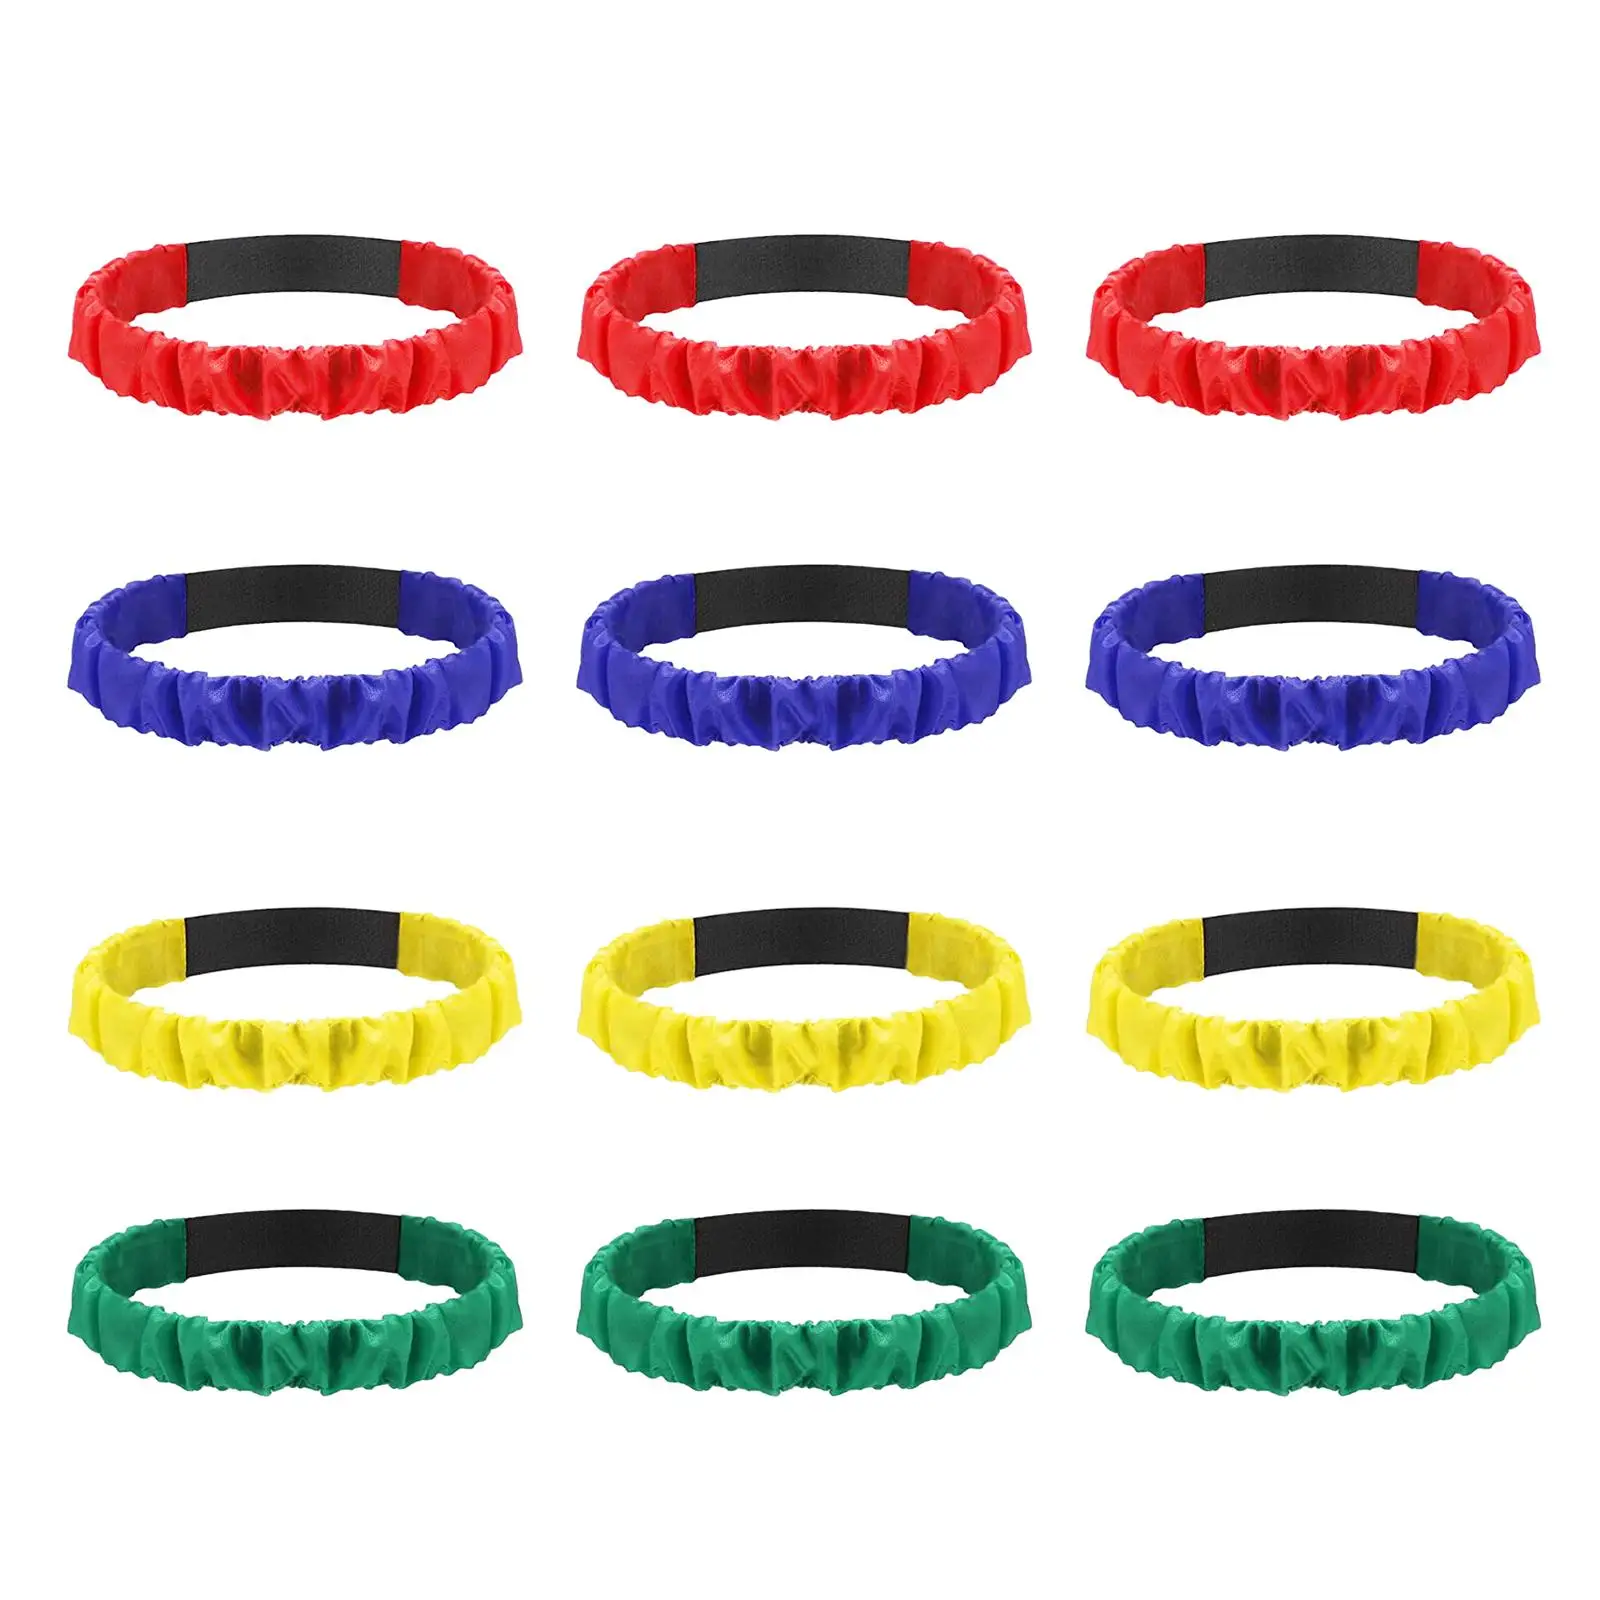 12 Pieces Race Legged Band Teens Family Backyard Activity Game Teamwork Training Team Building Adult Colorful Elastic Tie Strap